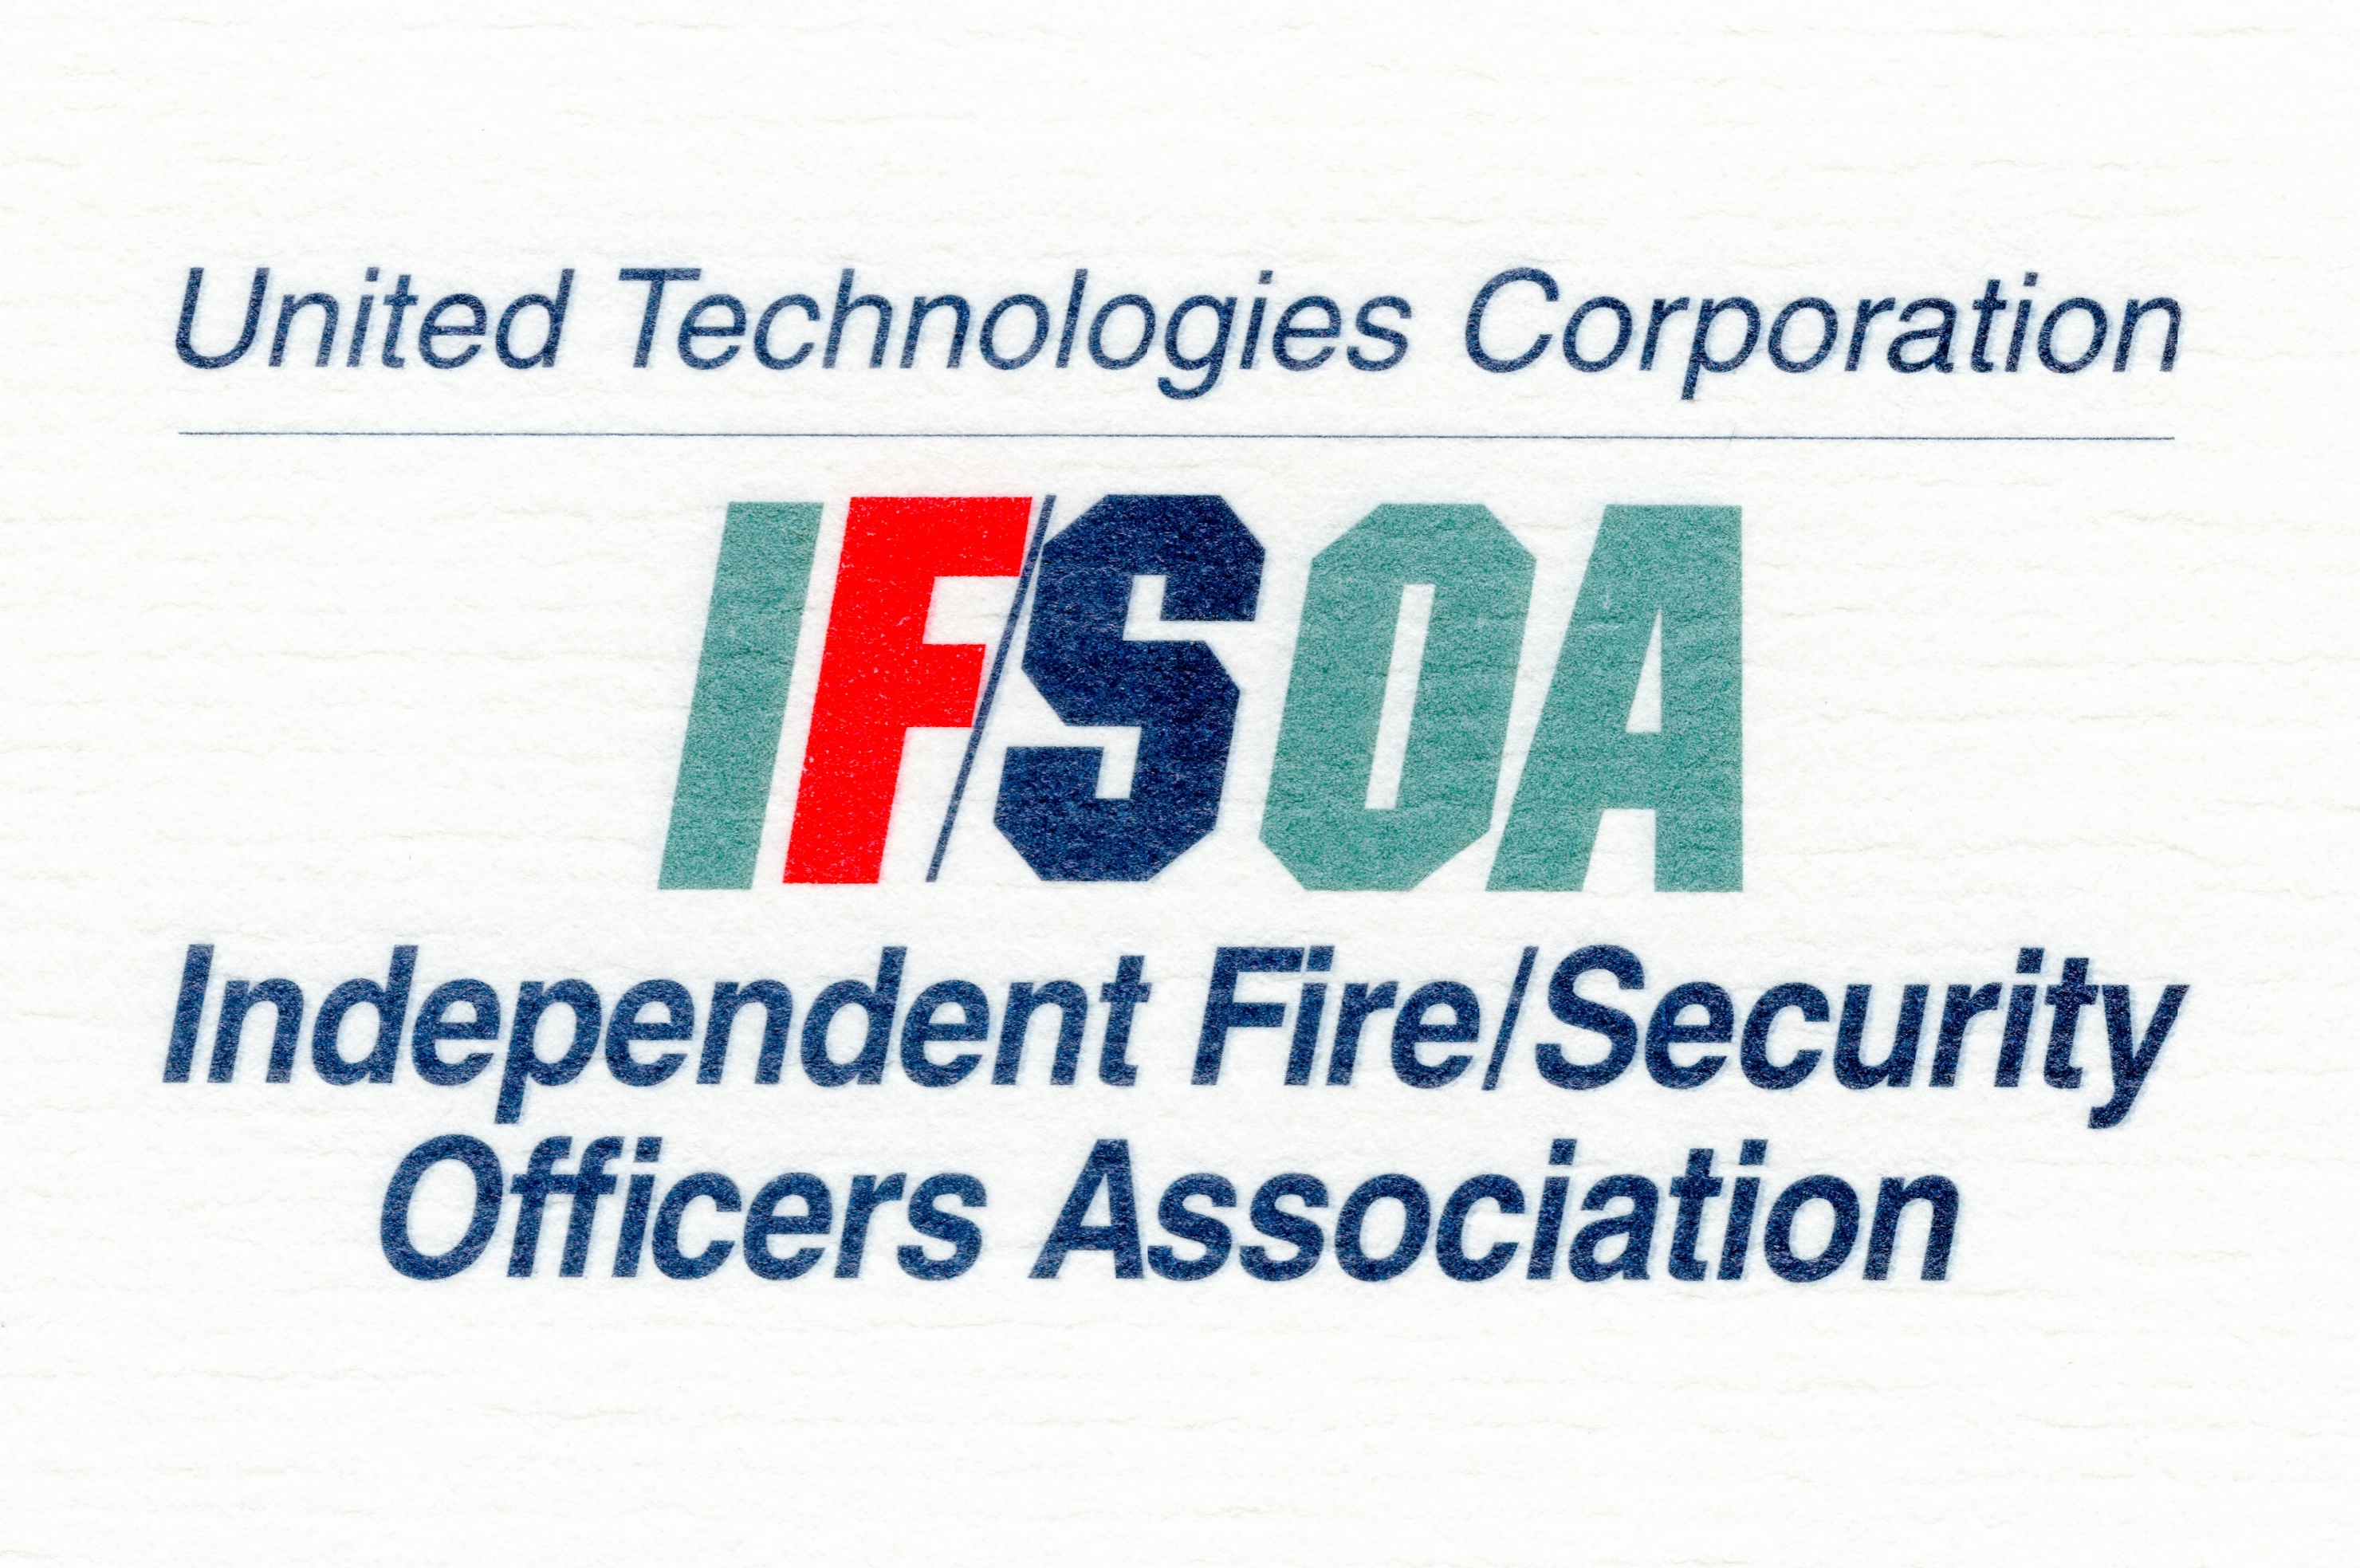 Independent Fire/Security Officers Association